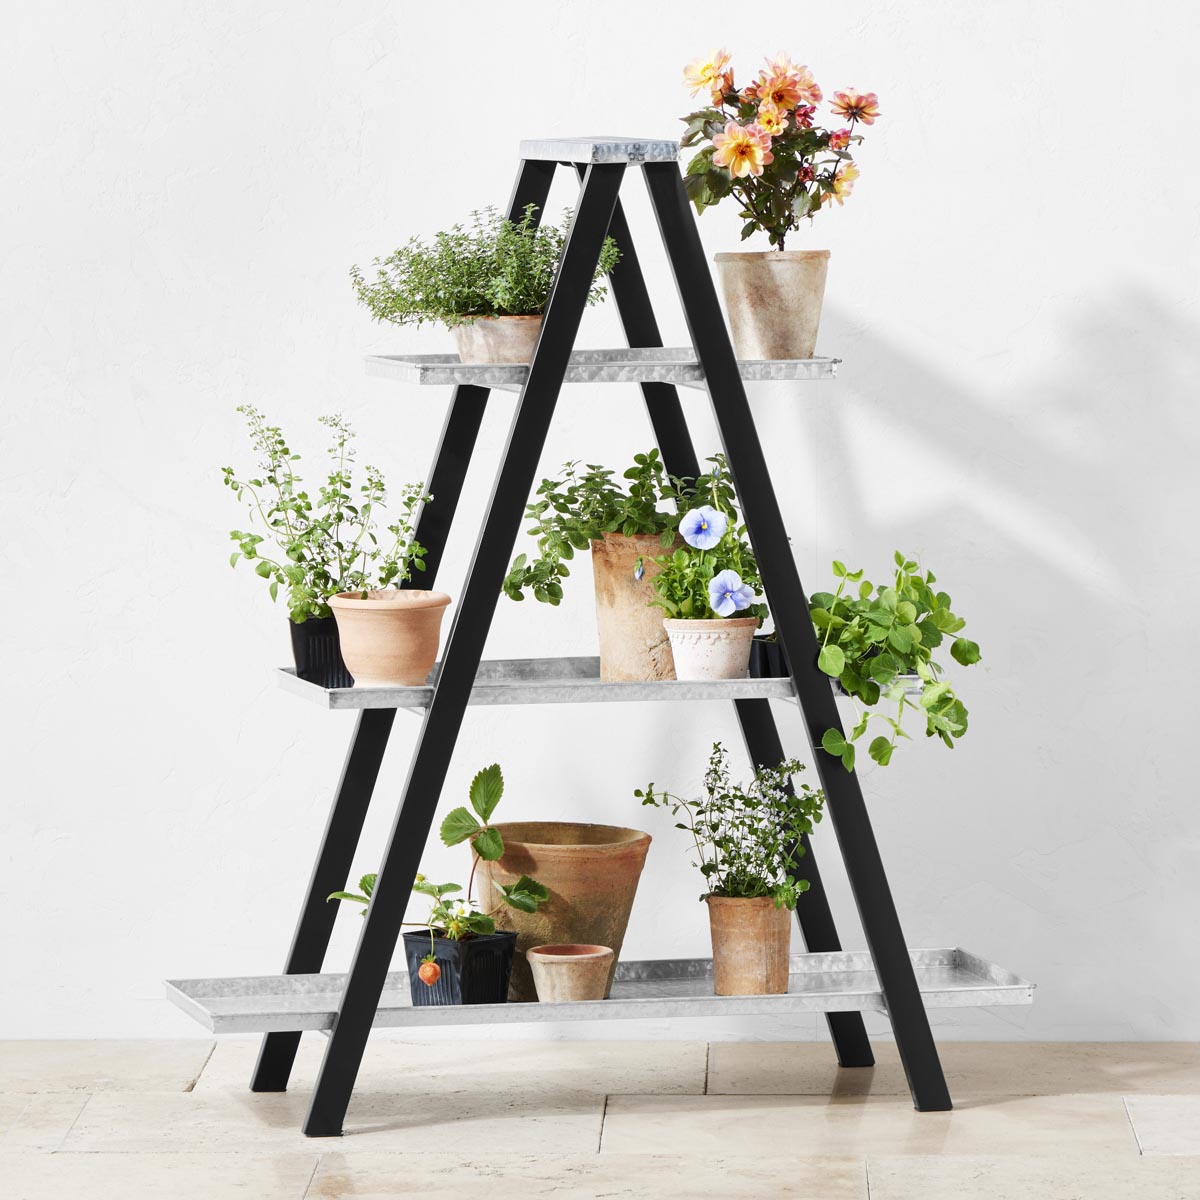 Decorative ladder with galvanized shelves for holding plants